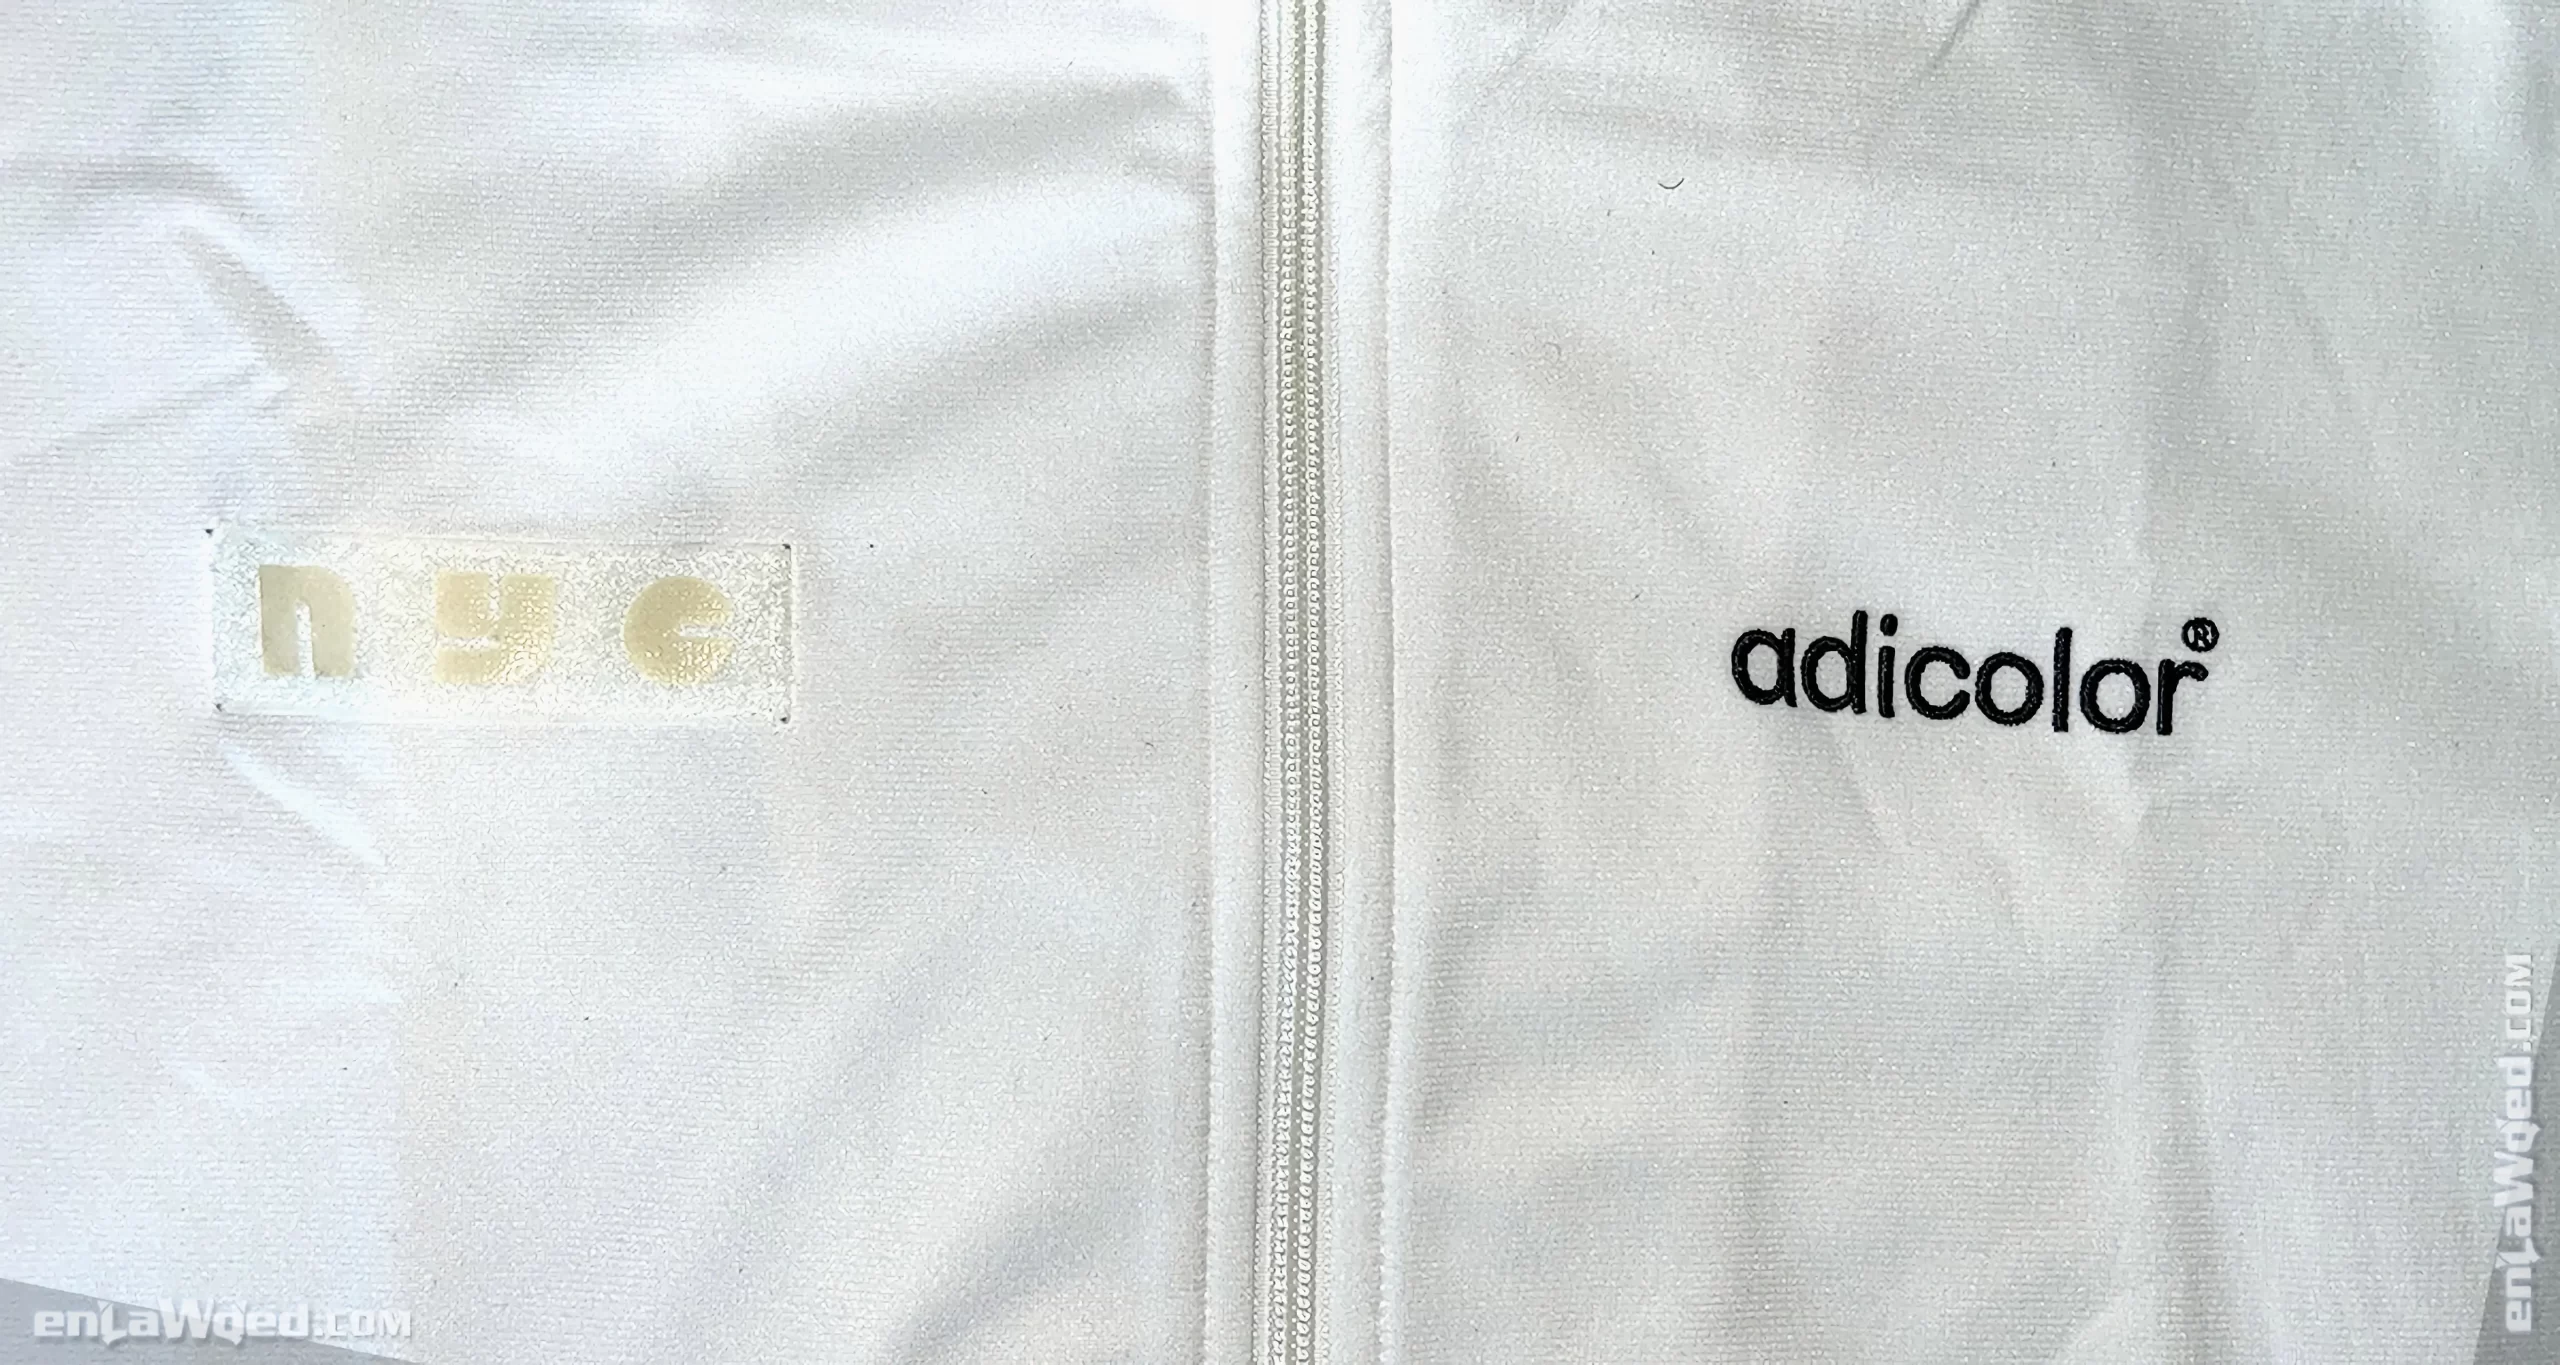 Men’s 2006 Adicolor W6 NYC Track Top by Adidas + Bill McMullen: Naked (EnLawded.com file #lmcglo1ip4sqedthh6q)